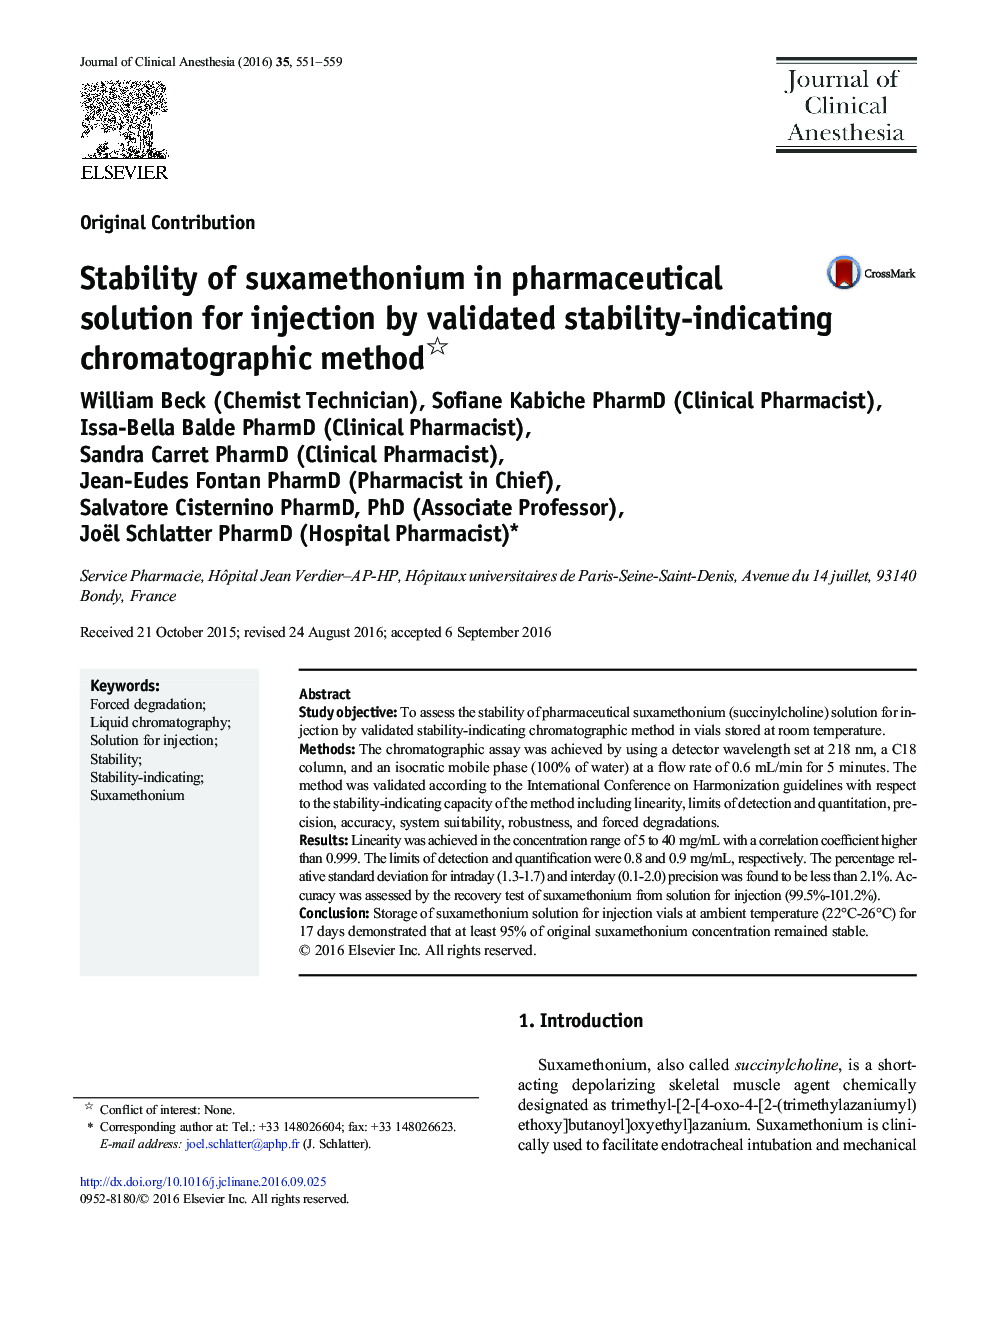 Stability of suxamethonium in pharmaceutical solution for injection by validated stability-indicating chromatographic method